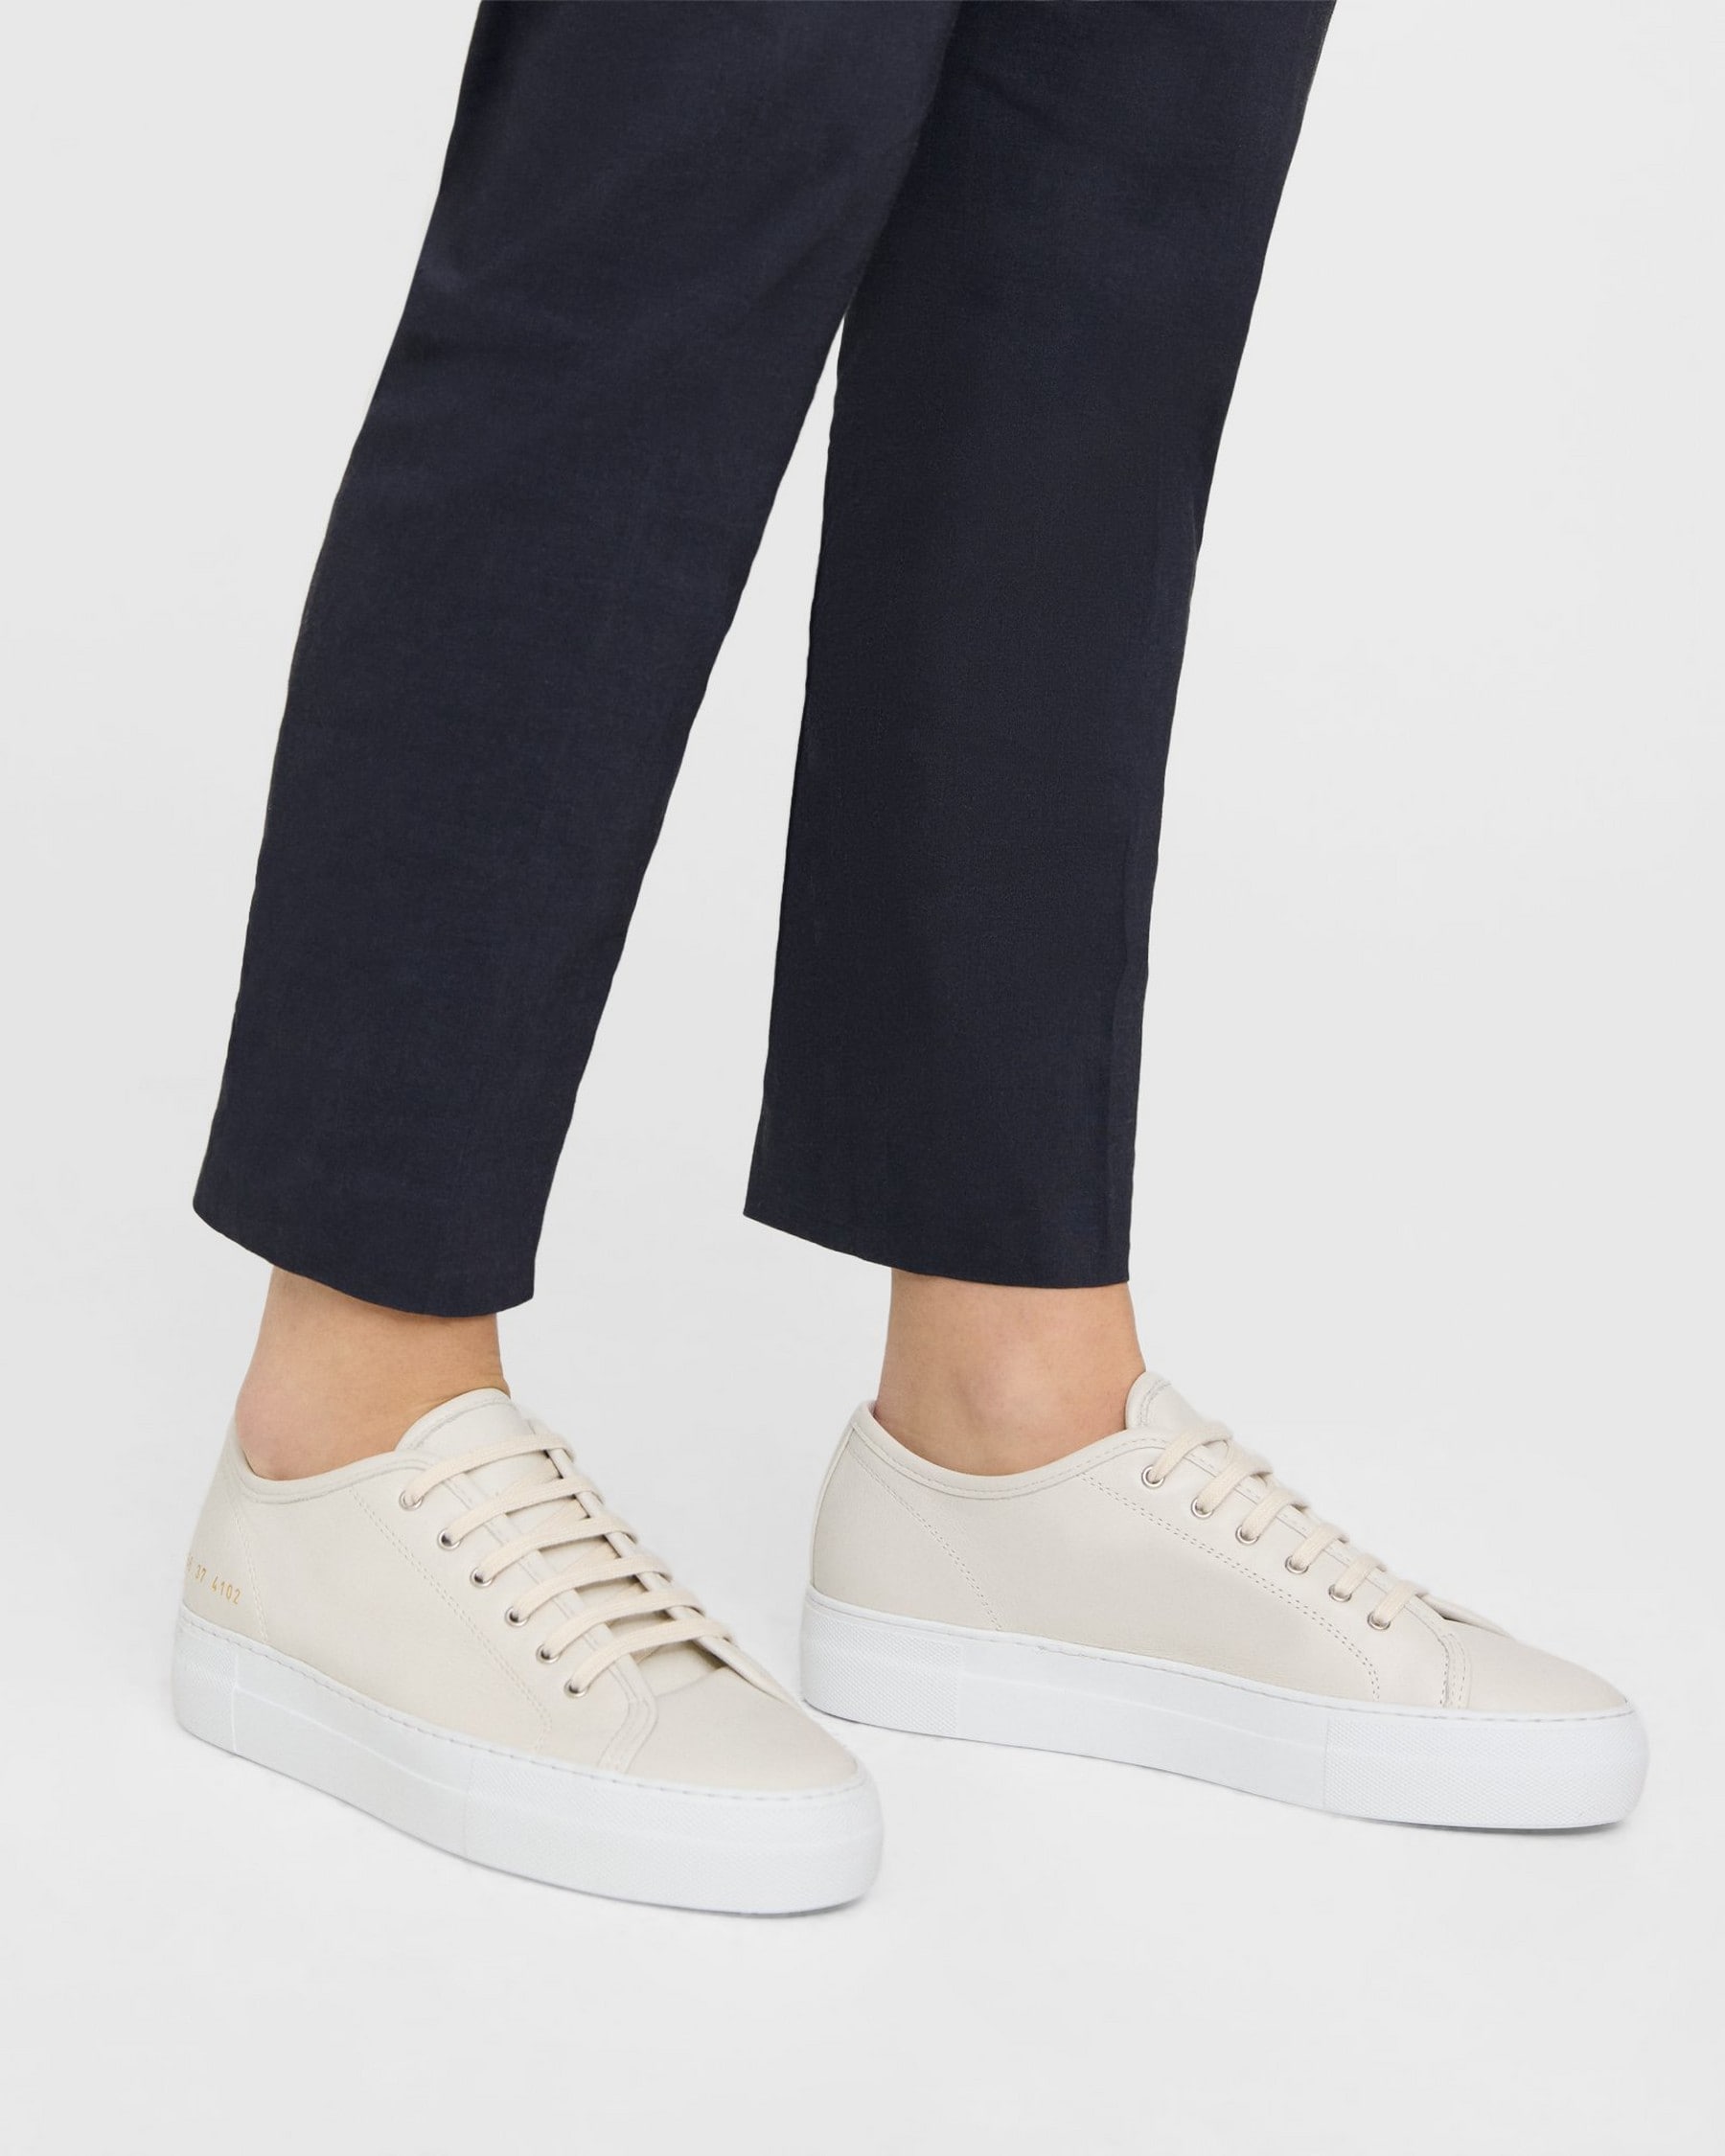 Theory Common Projects Women’s Tournament Low-Top Super Platform Sneakers